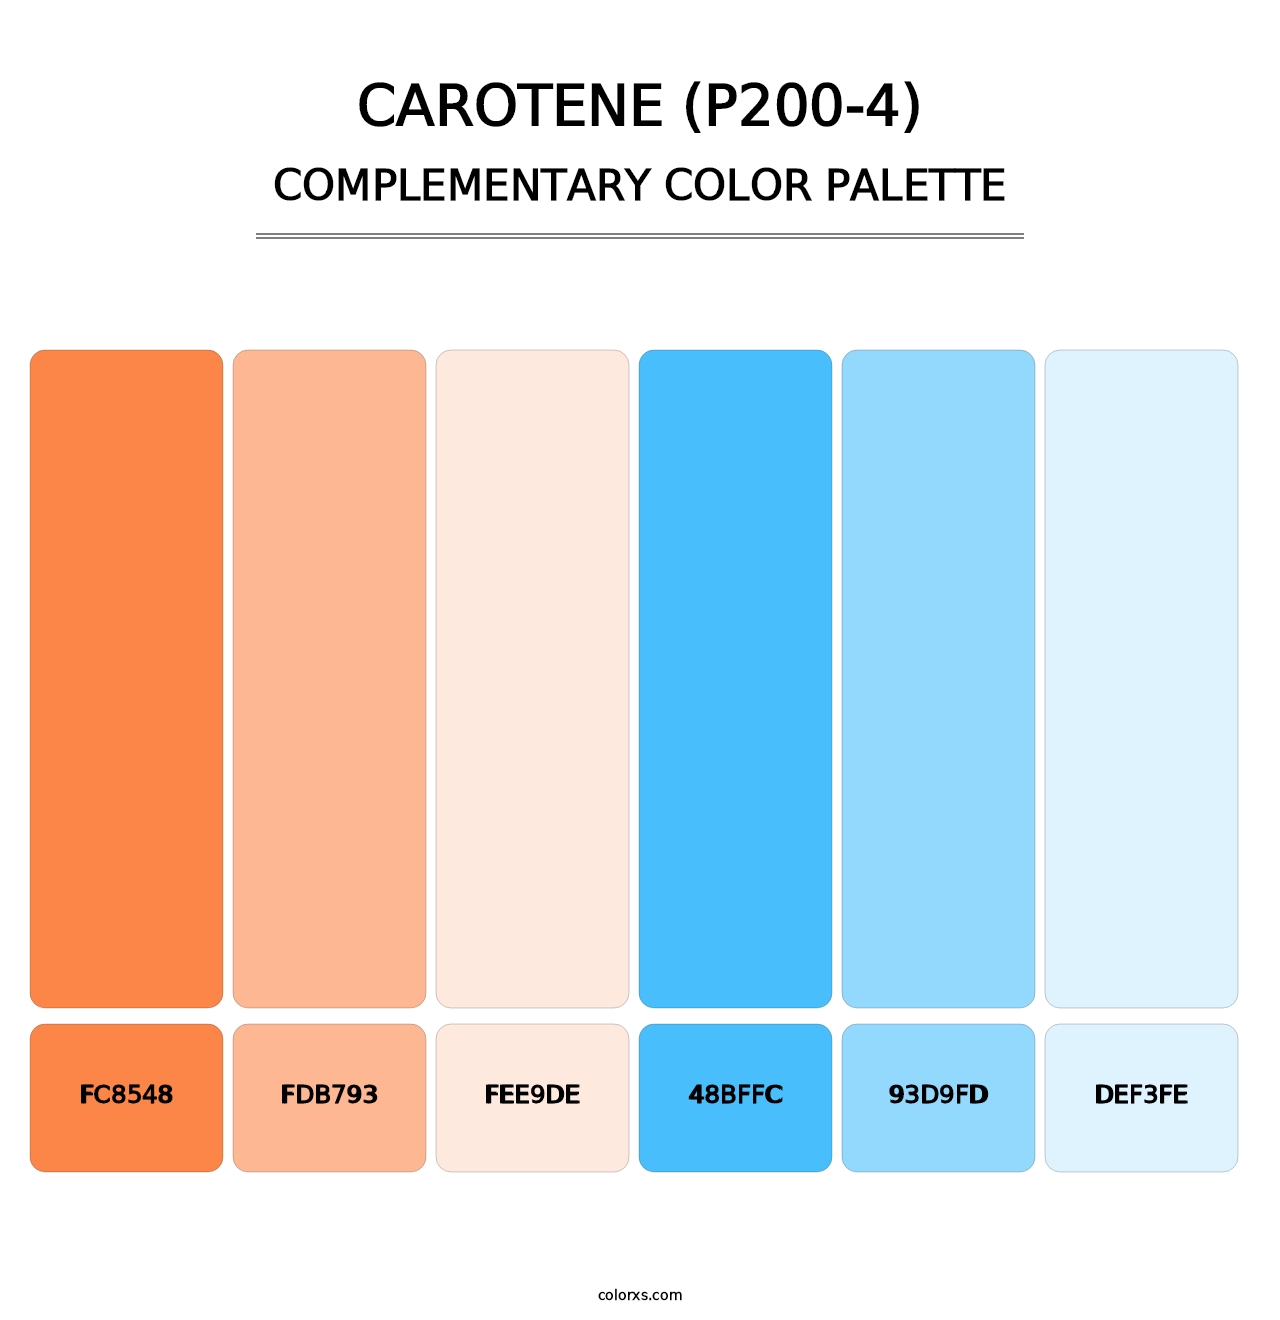 Carotene (P200-4) - Complementary Color Palette